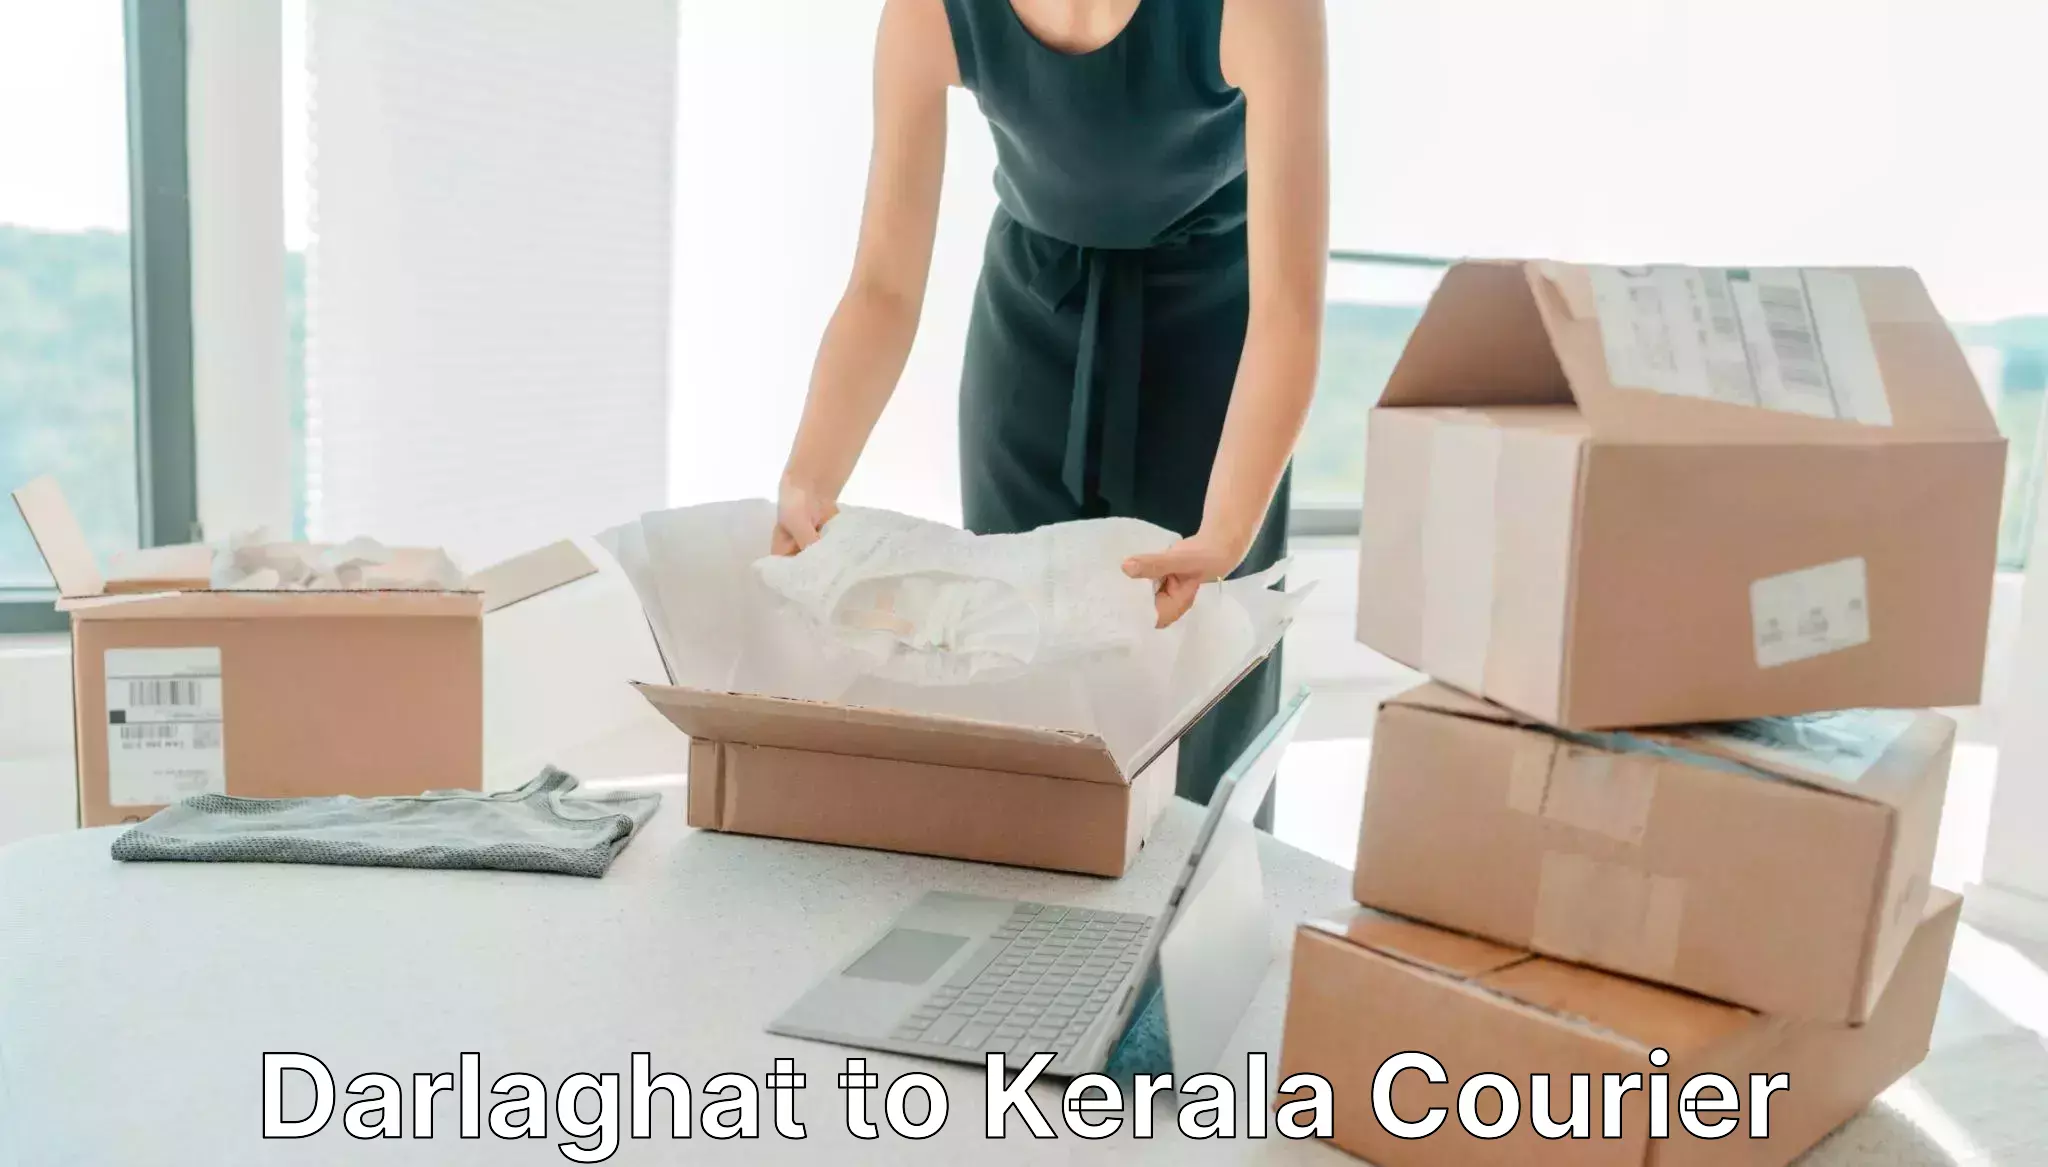 Personal parcel delivery in Darlaghat to Kerala